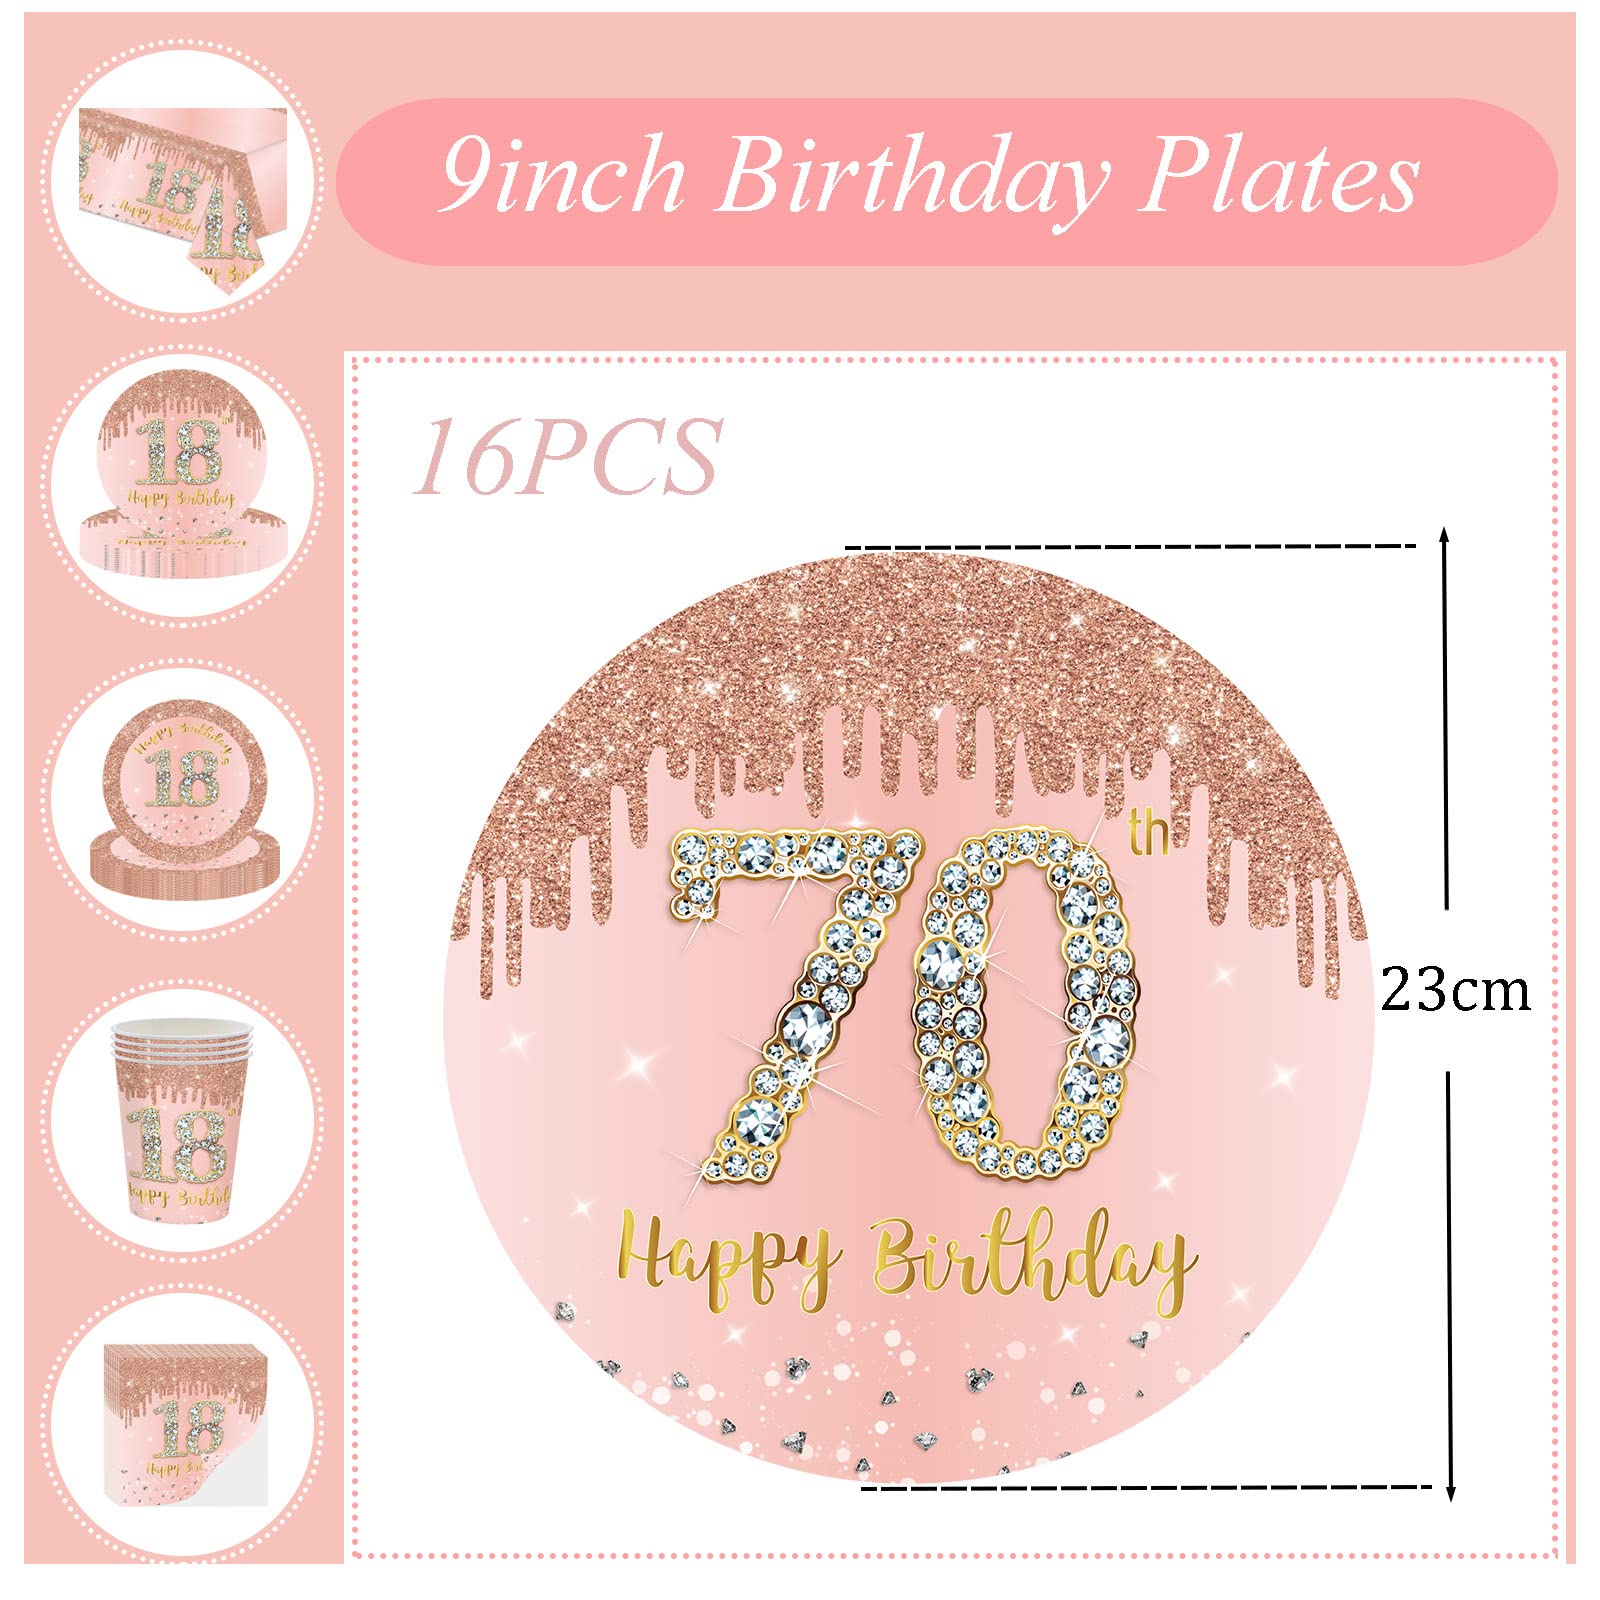 16pcs Rose Gold 70th Birthday Paper Plates 9inch 70th Party Table Decor,70th Women Birthday Party Paper Plates 9 inches Tableware,Happy 70th Birthday Tableware Plate for Her,Women,70th Party Supplies